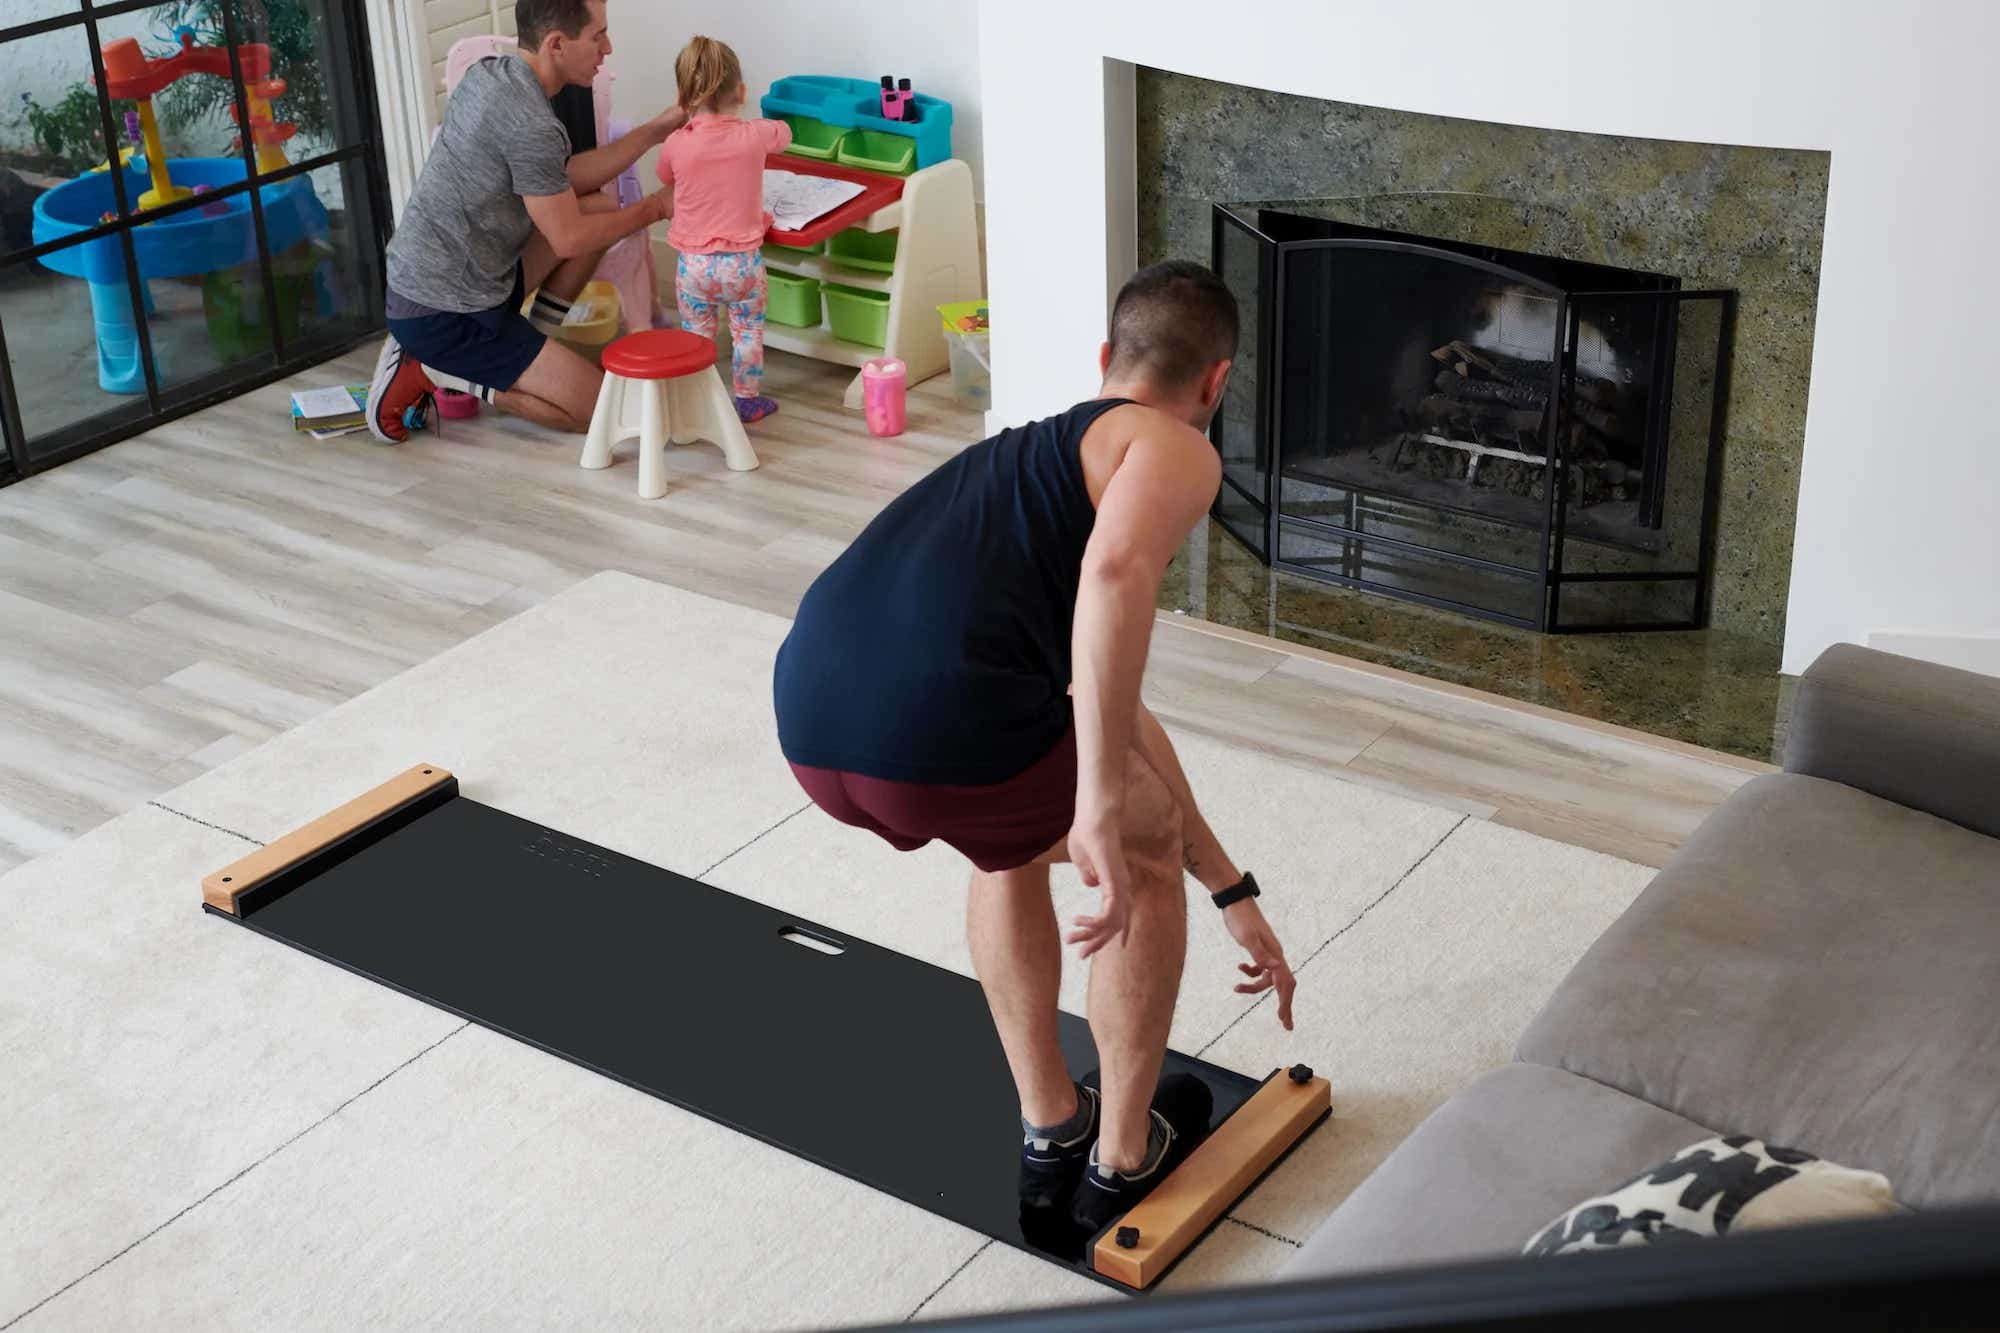 A man using a Brrrn painting in the living room